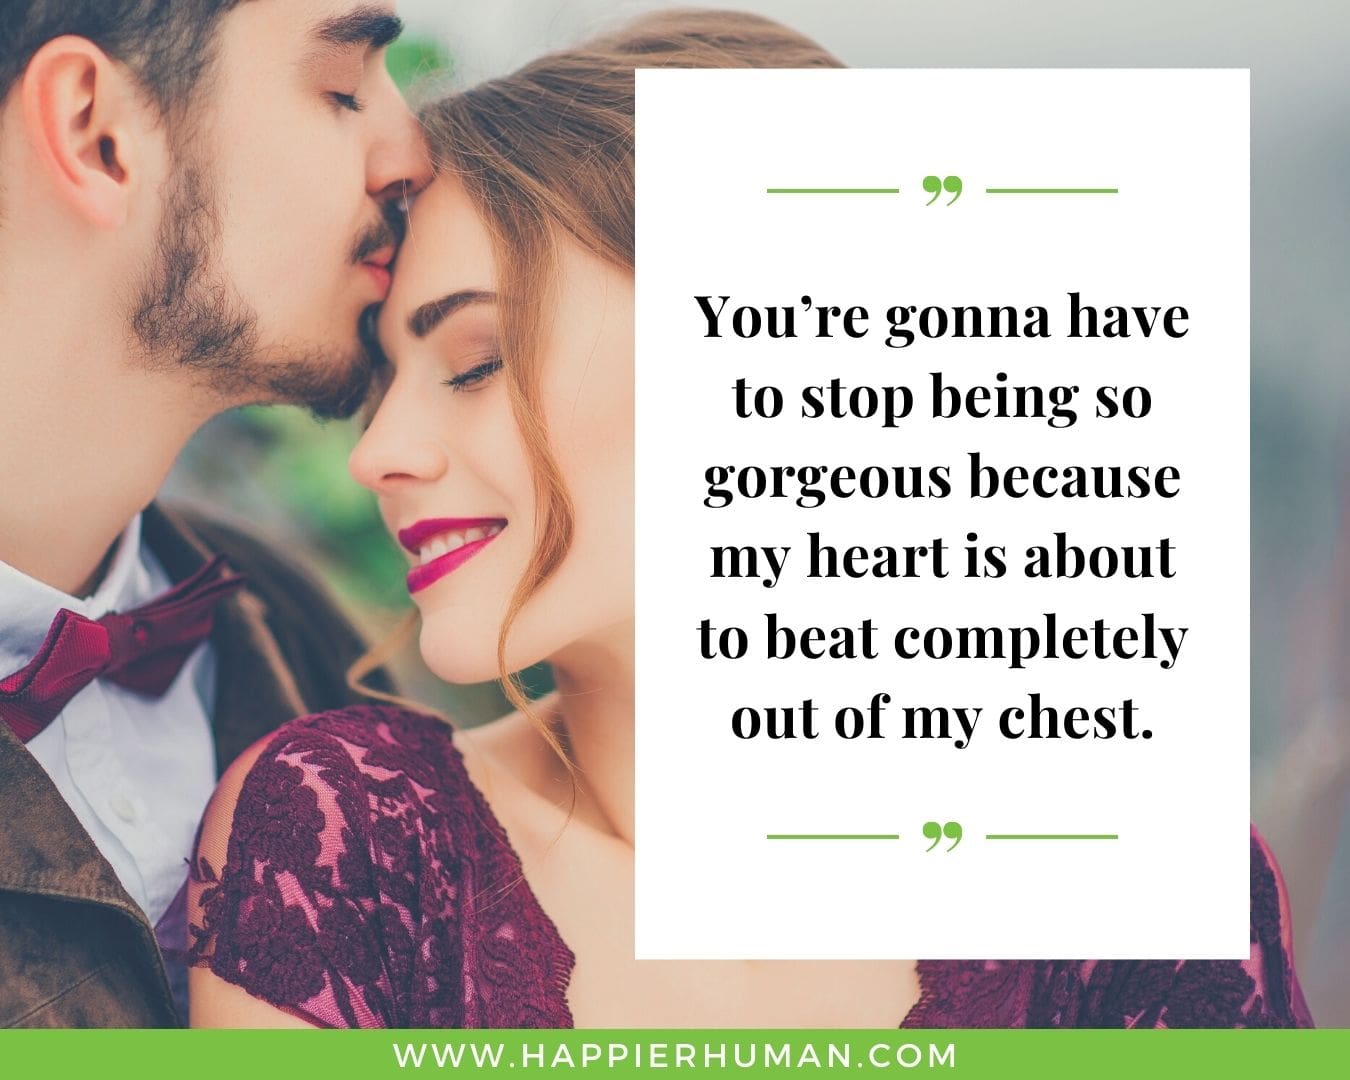 Relationship quotes of love- “You’re gonna have to stop being so gorgeous because my heart is about to beat completely out of my chest.”